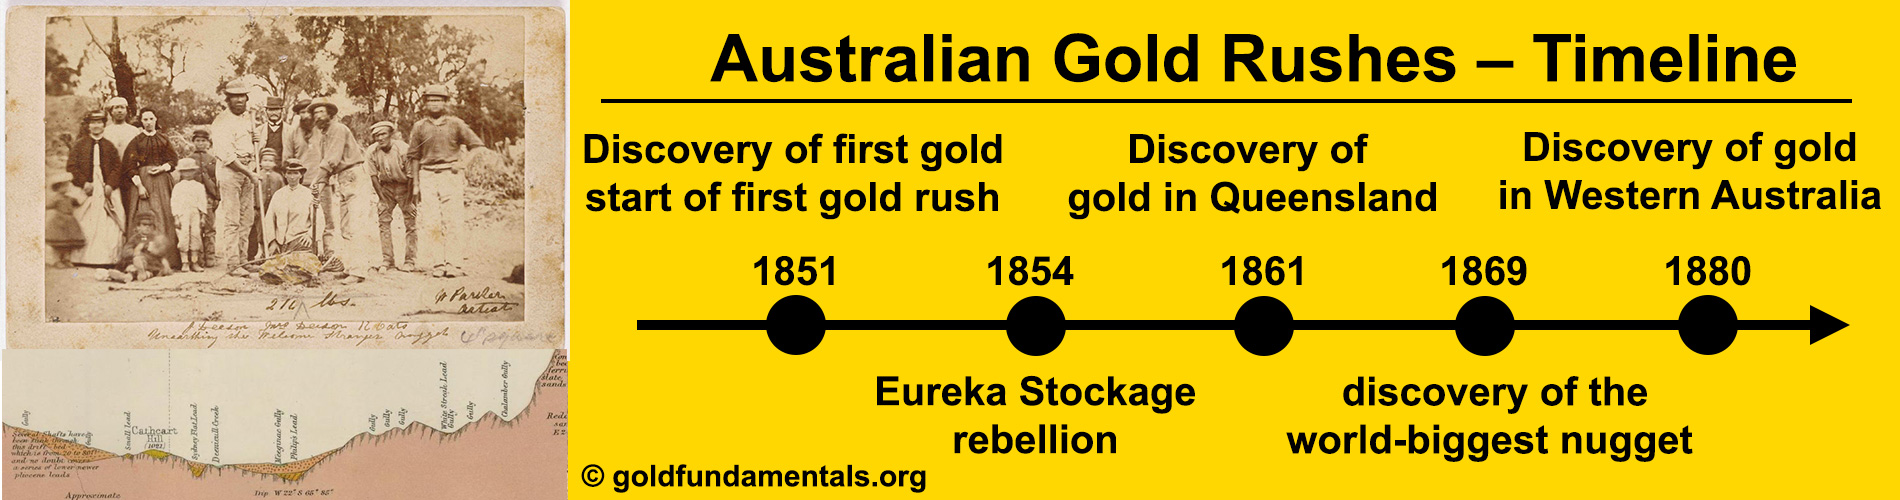 Australian Gold Rushes History - Timeline and Main Events